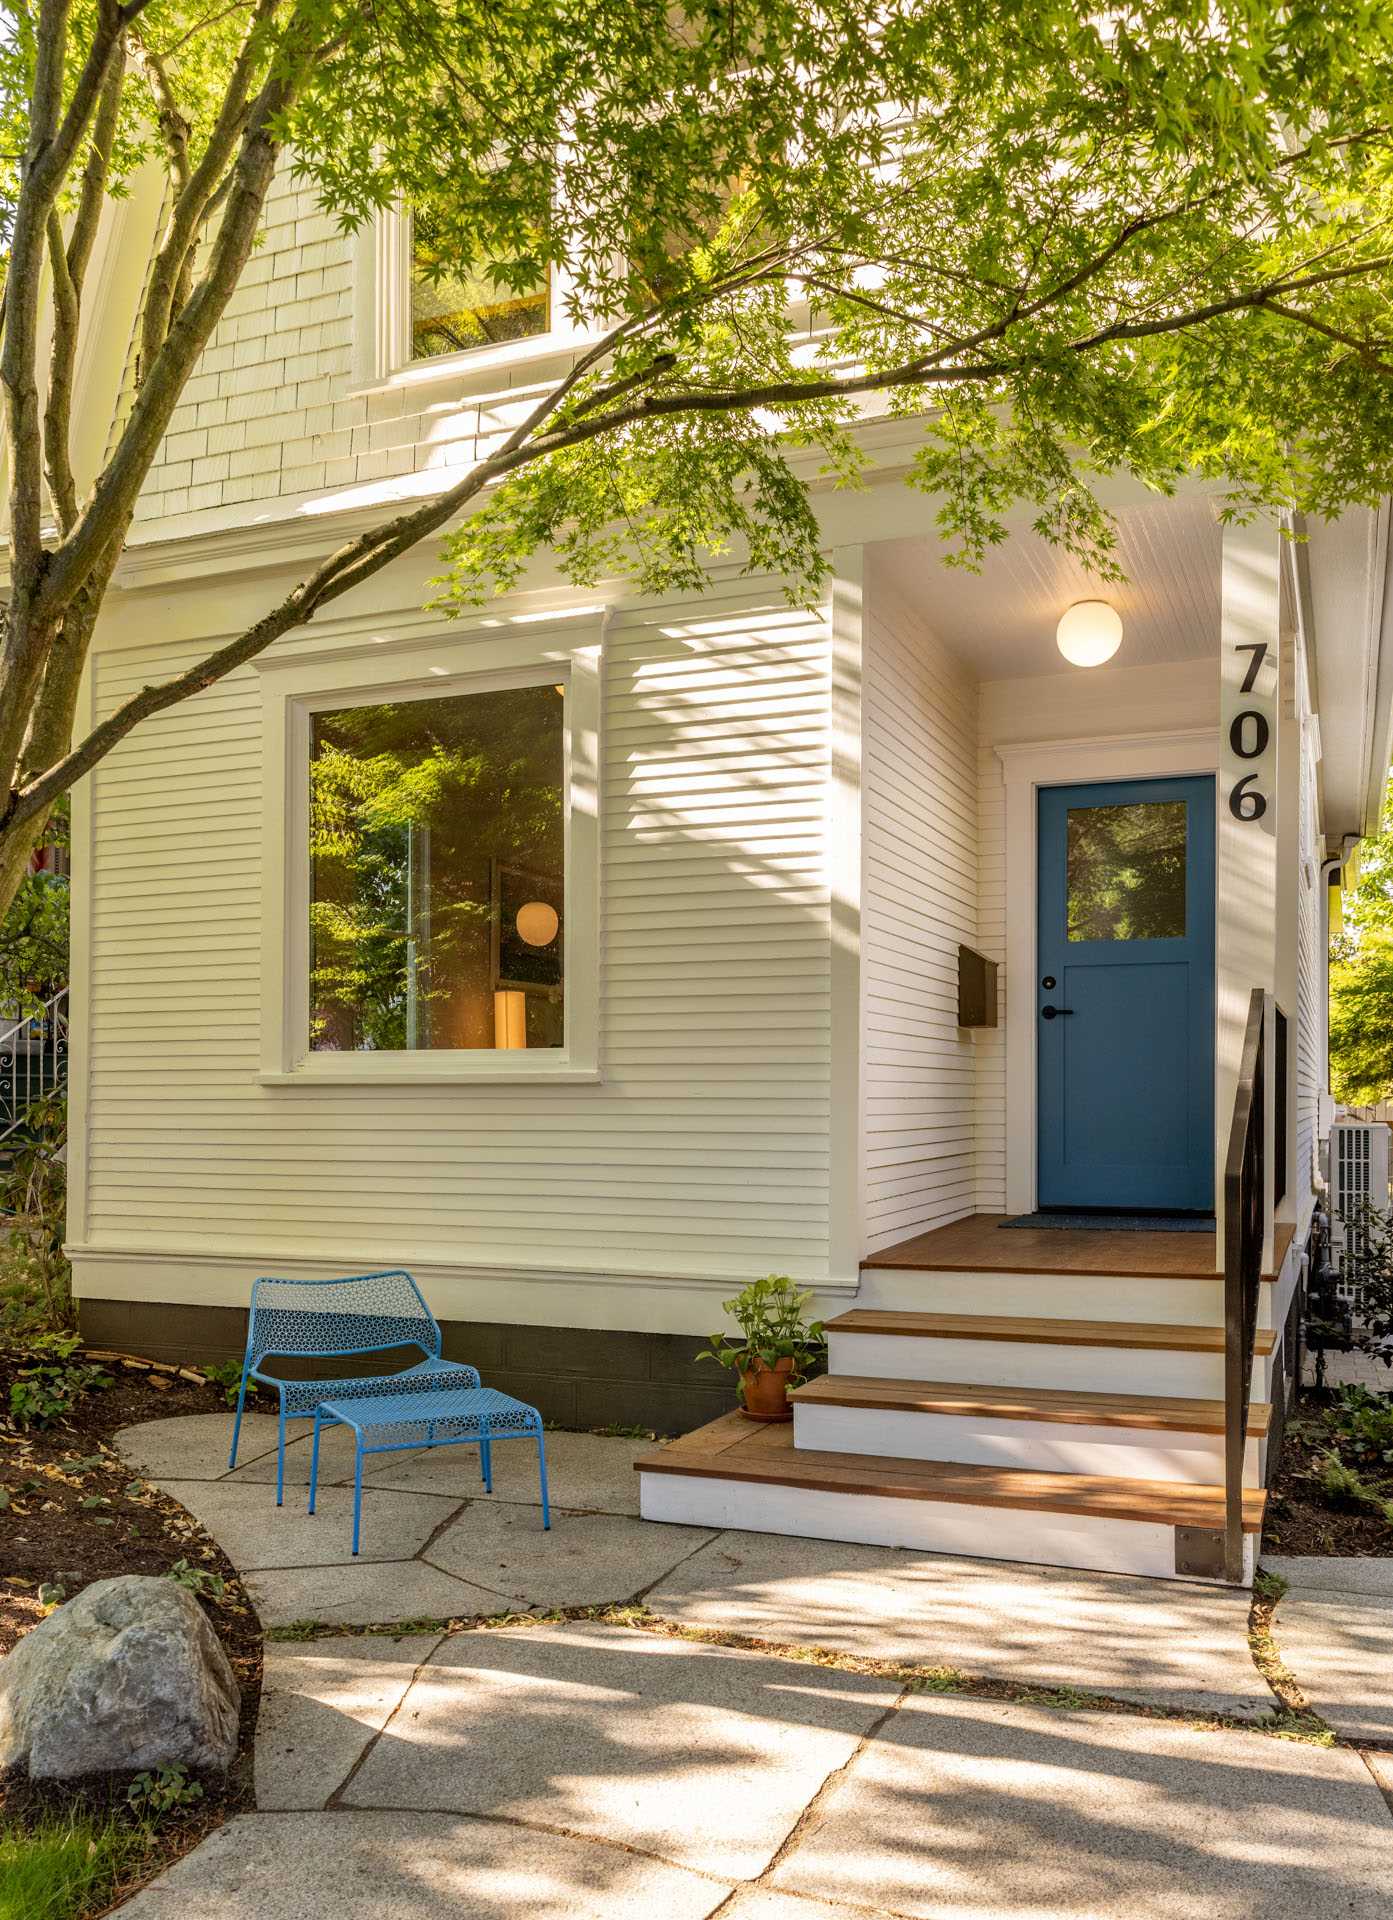 A remodeled 1907 cottage with a blue front door and stone patio.